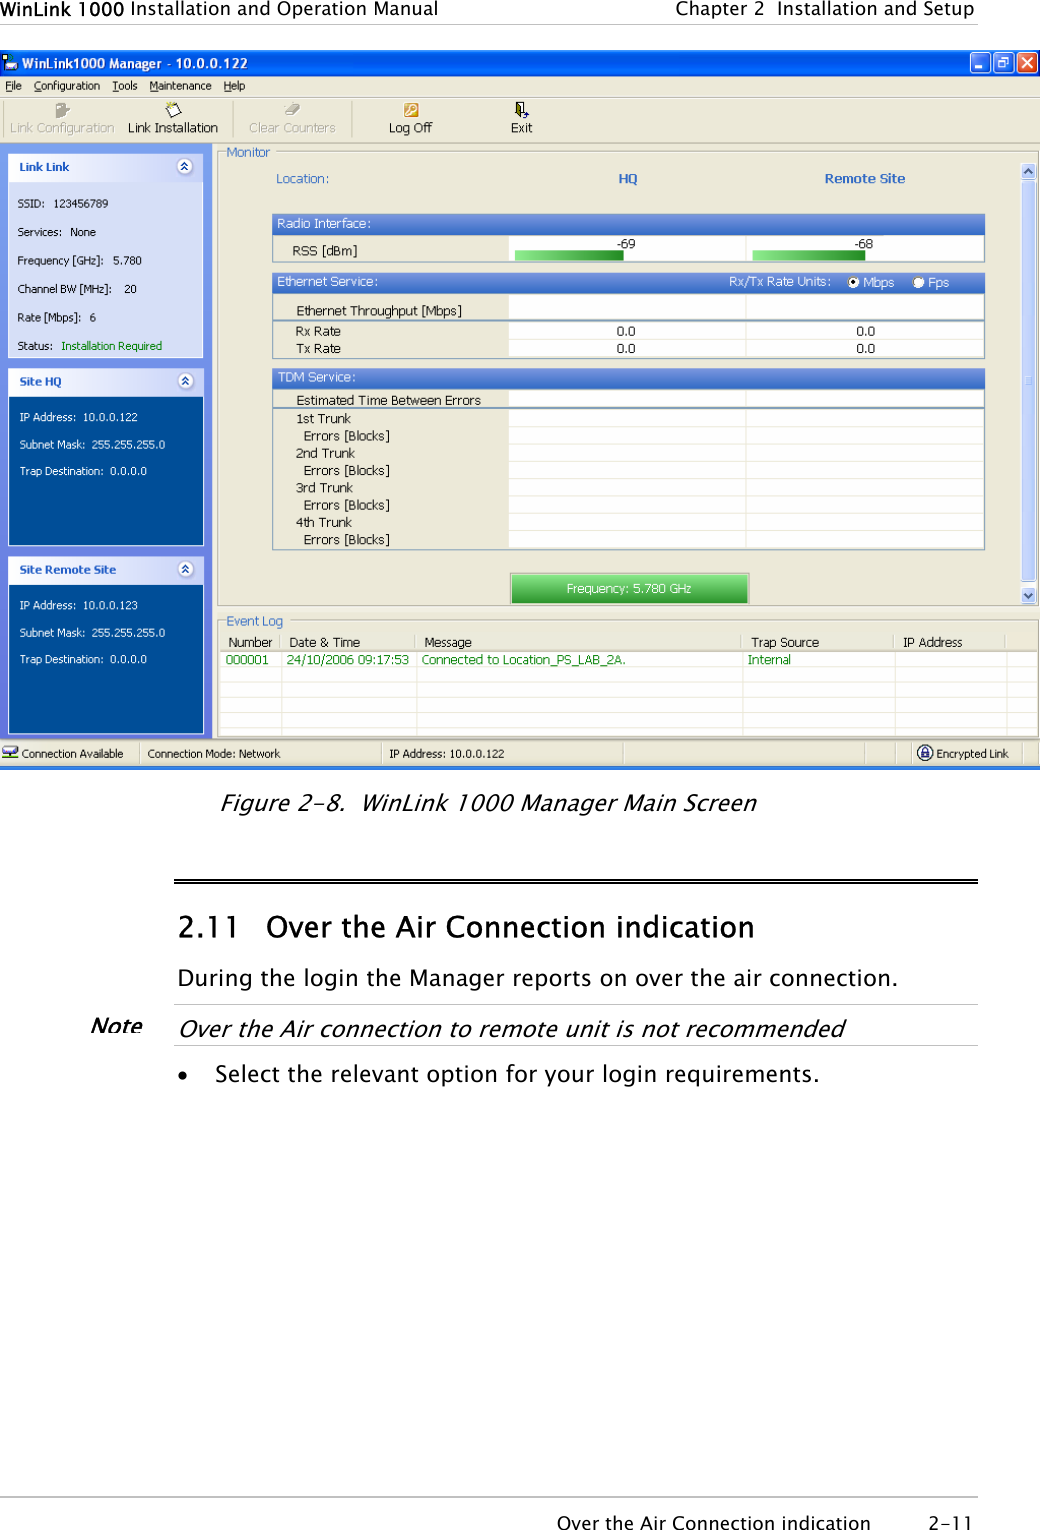 WinLink 1000 Installation and Operation Manual  Chapter  2  Installation and Setup  Figure  2-8.  WinLink 1000 Manager Main Screen 2.11 Over the Air Connection indication During the login the Manager reports on over the air connection.  NoteOver the Air connection to remote unit is not recommended  • Select the relevant option for your login requirements.   Over the Air Connection indication  2-11 